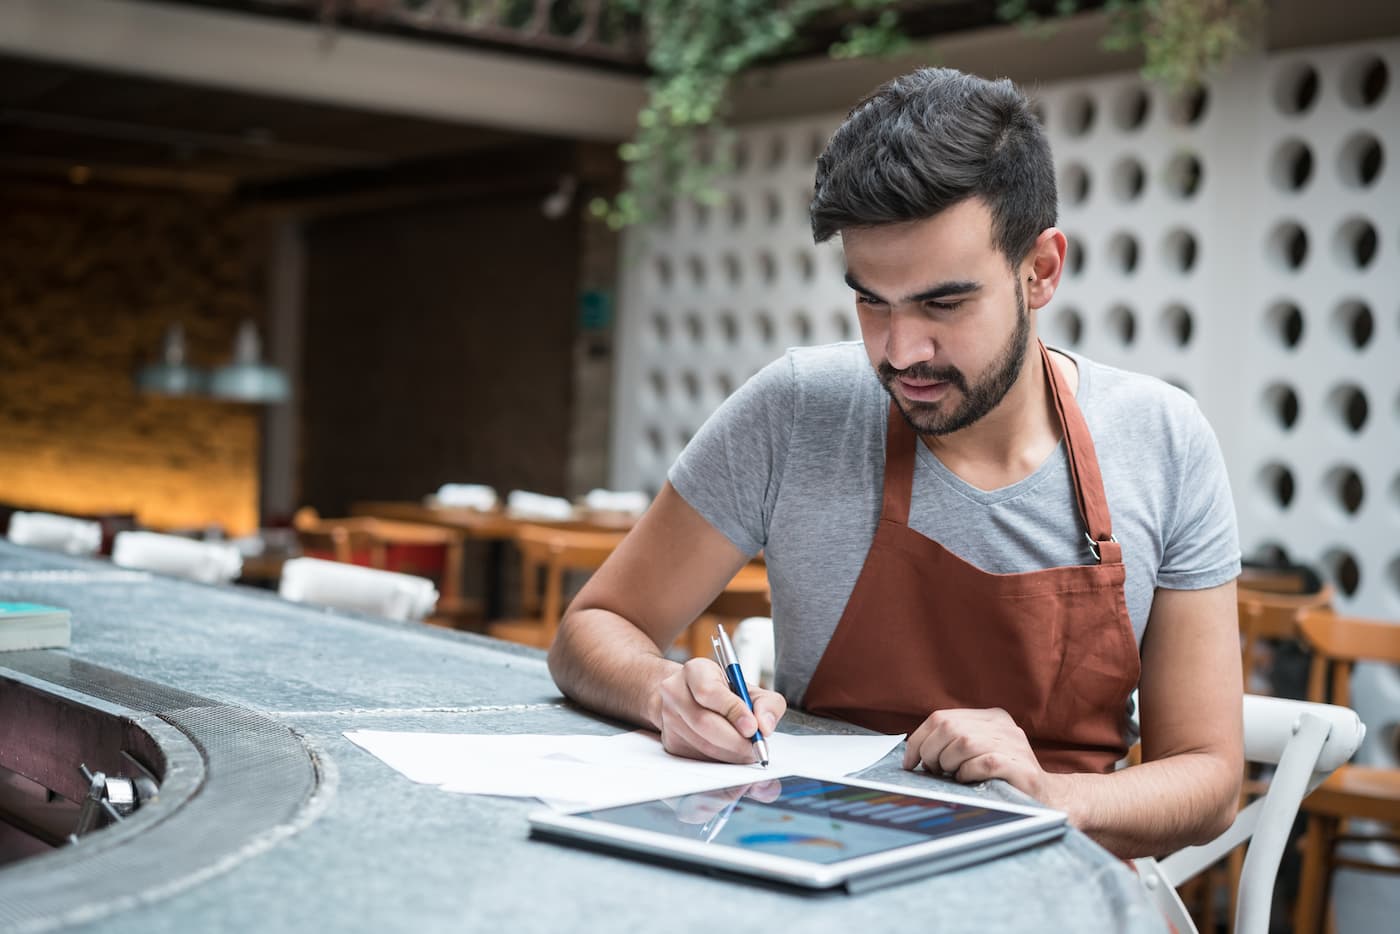 Restaurant owner looking at accounting software on tablet